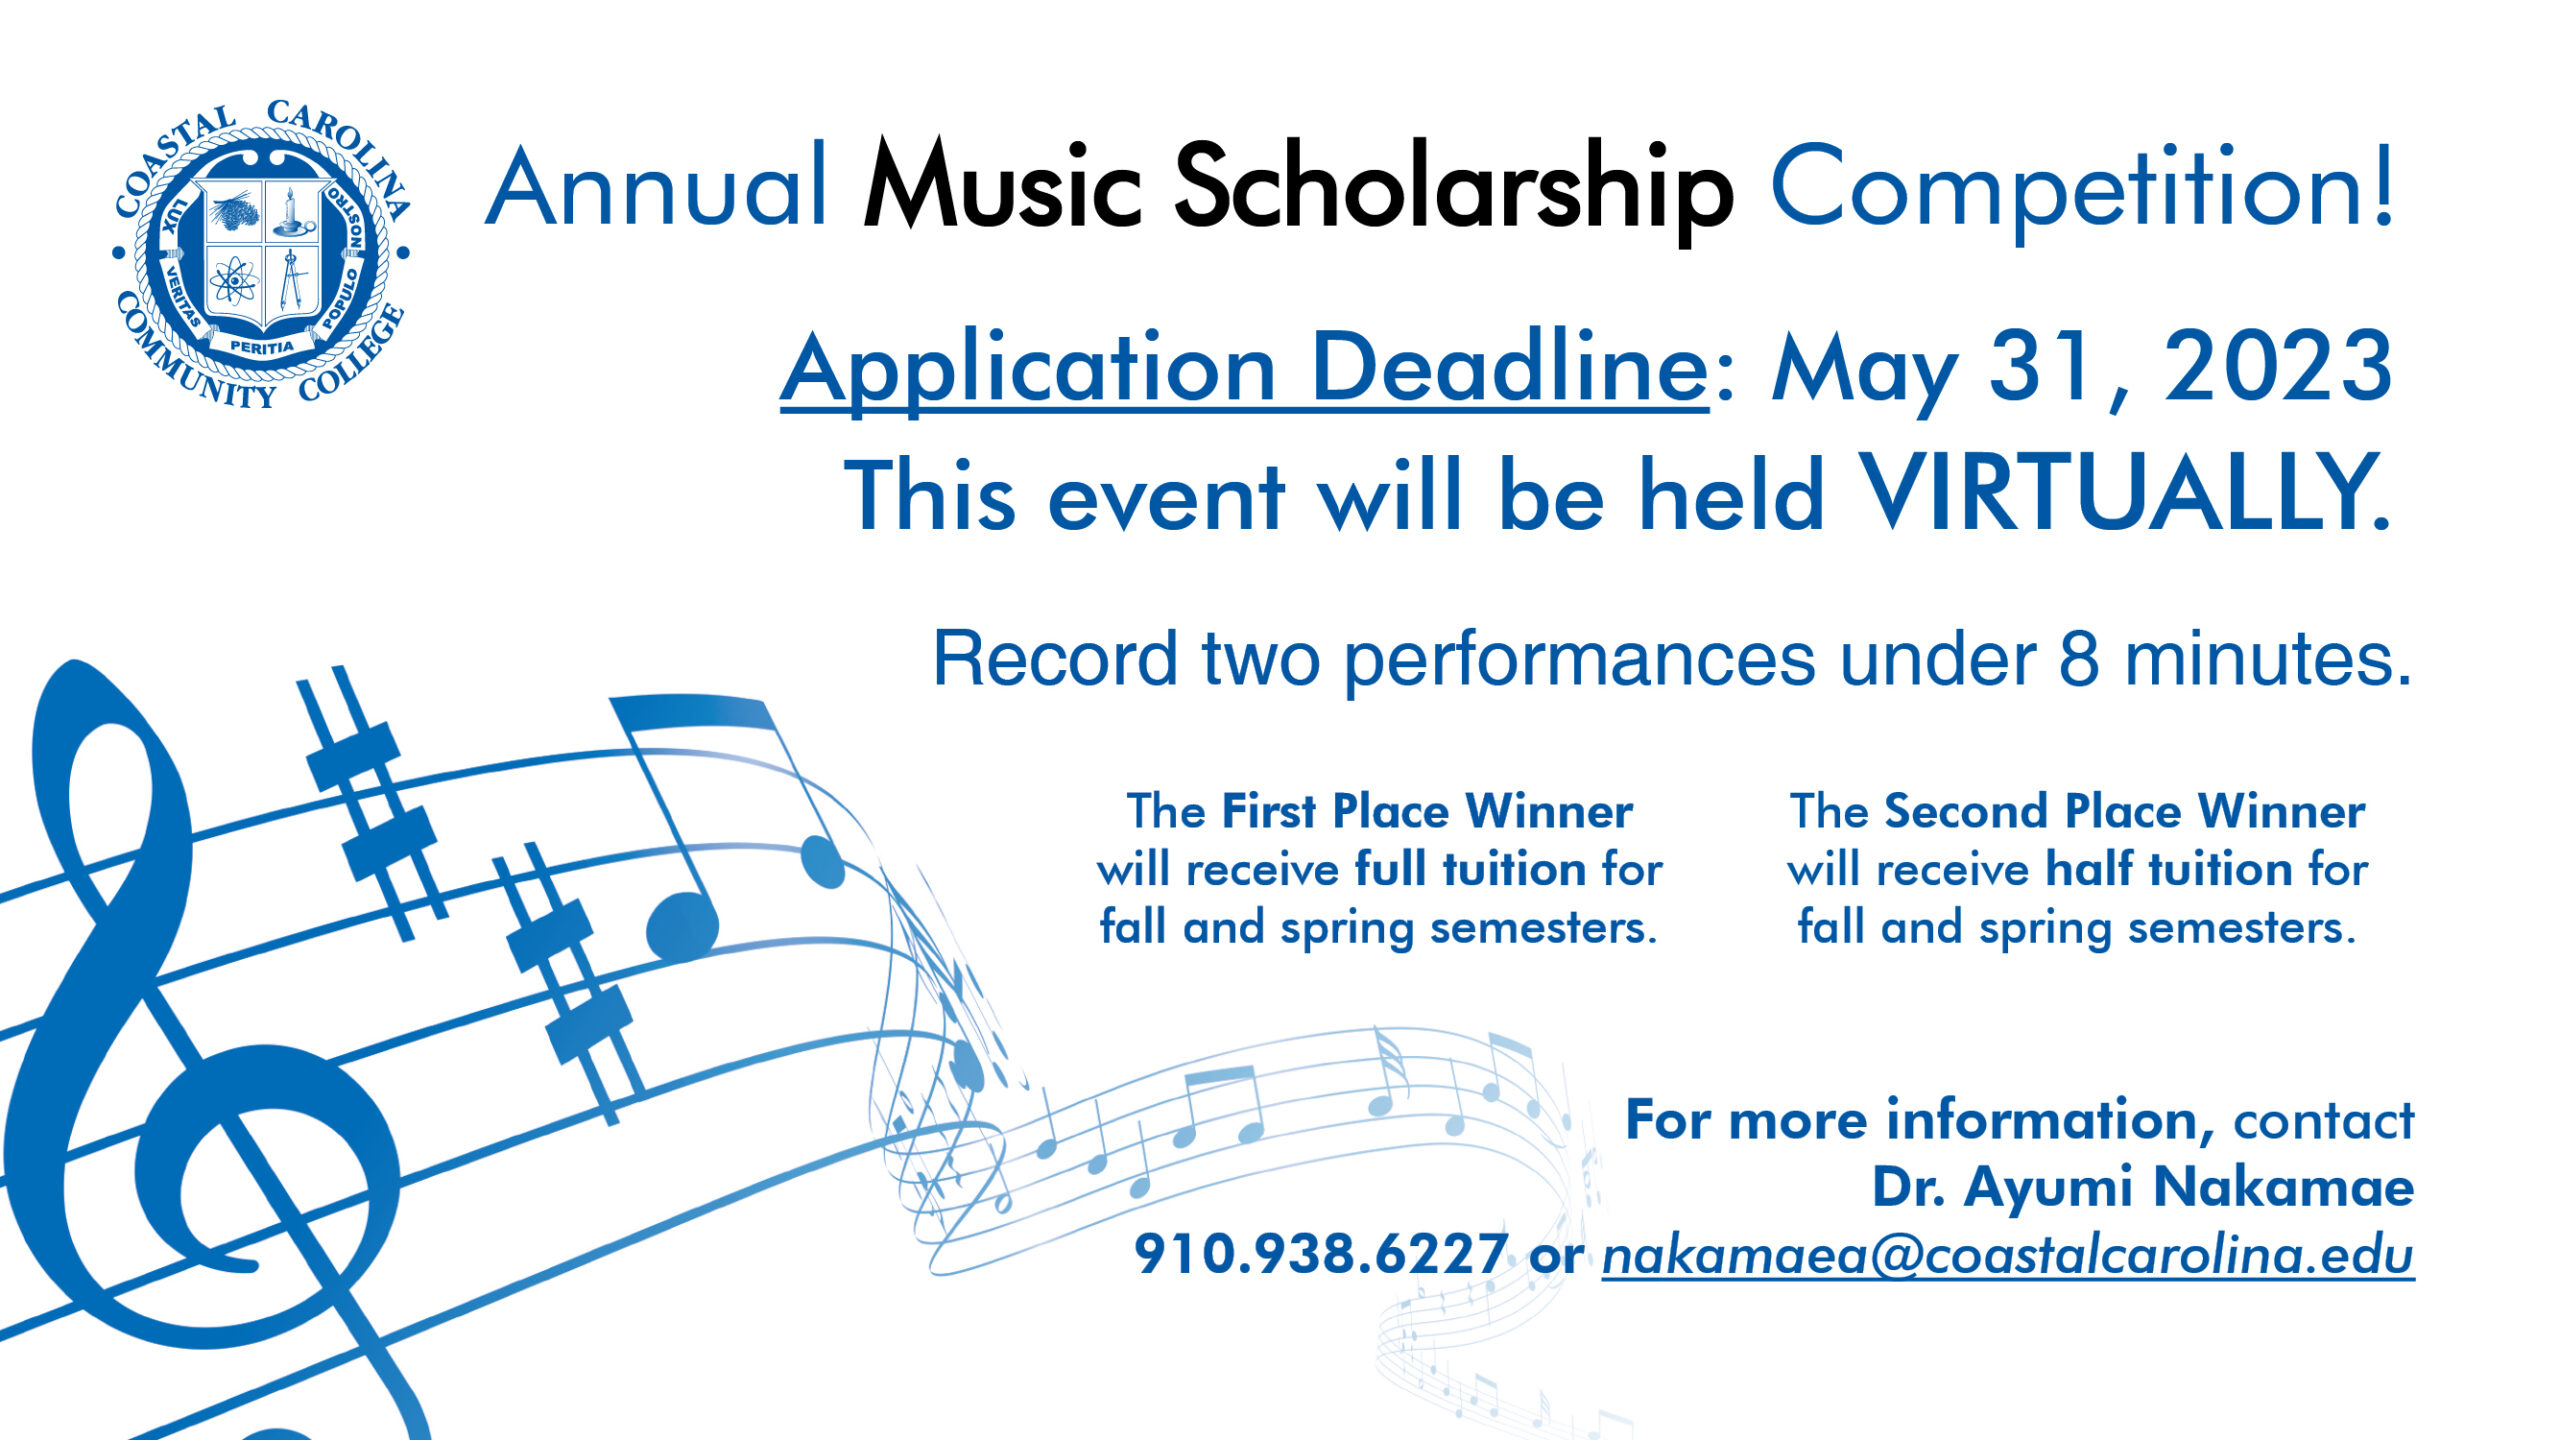 Annual Music Scholarship Competition! Application Deadline: May 31, 2023. This event will be held virtually! Record two performances under 8 minutes. The first place winner will receive full tuition for fall and spring semesters. The second place winner will receive half tuition for fall and spring semesters. For more information, contact Dr. Ayumi Nakamae 910-938-6227 or nakamaea@coastalcarolina.edu